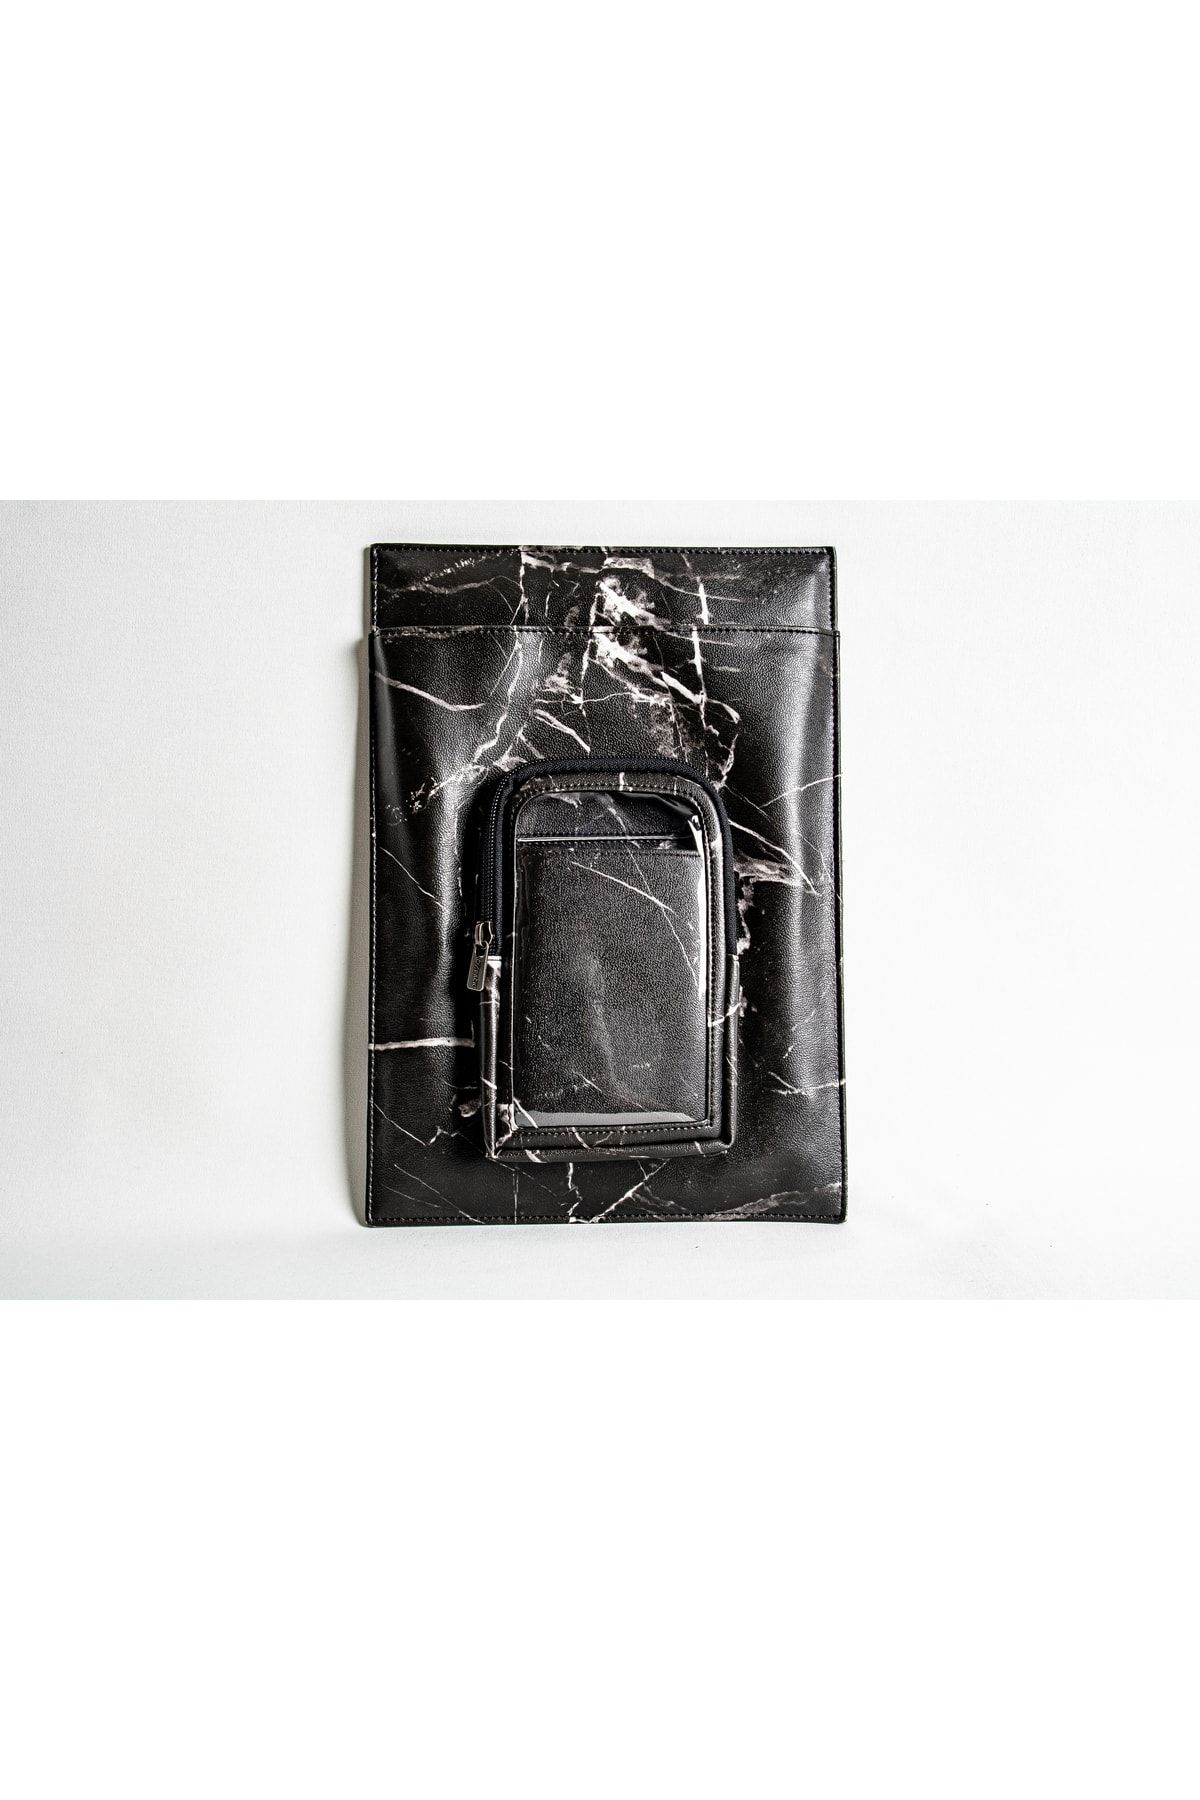 Ozpack Paper Marble Black PSD185